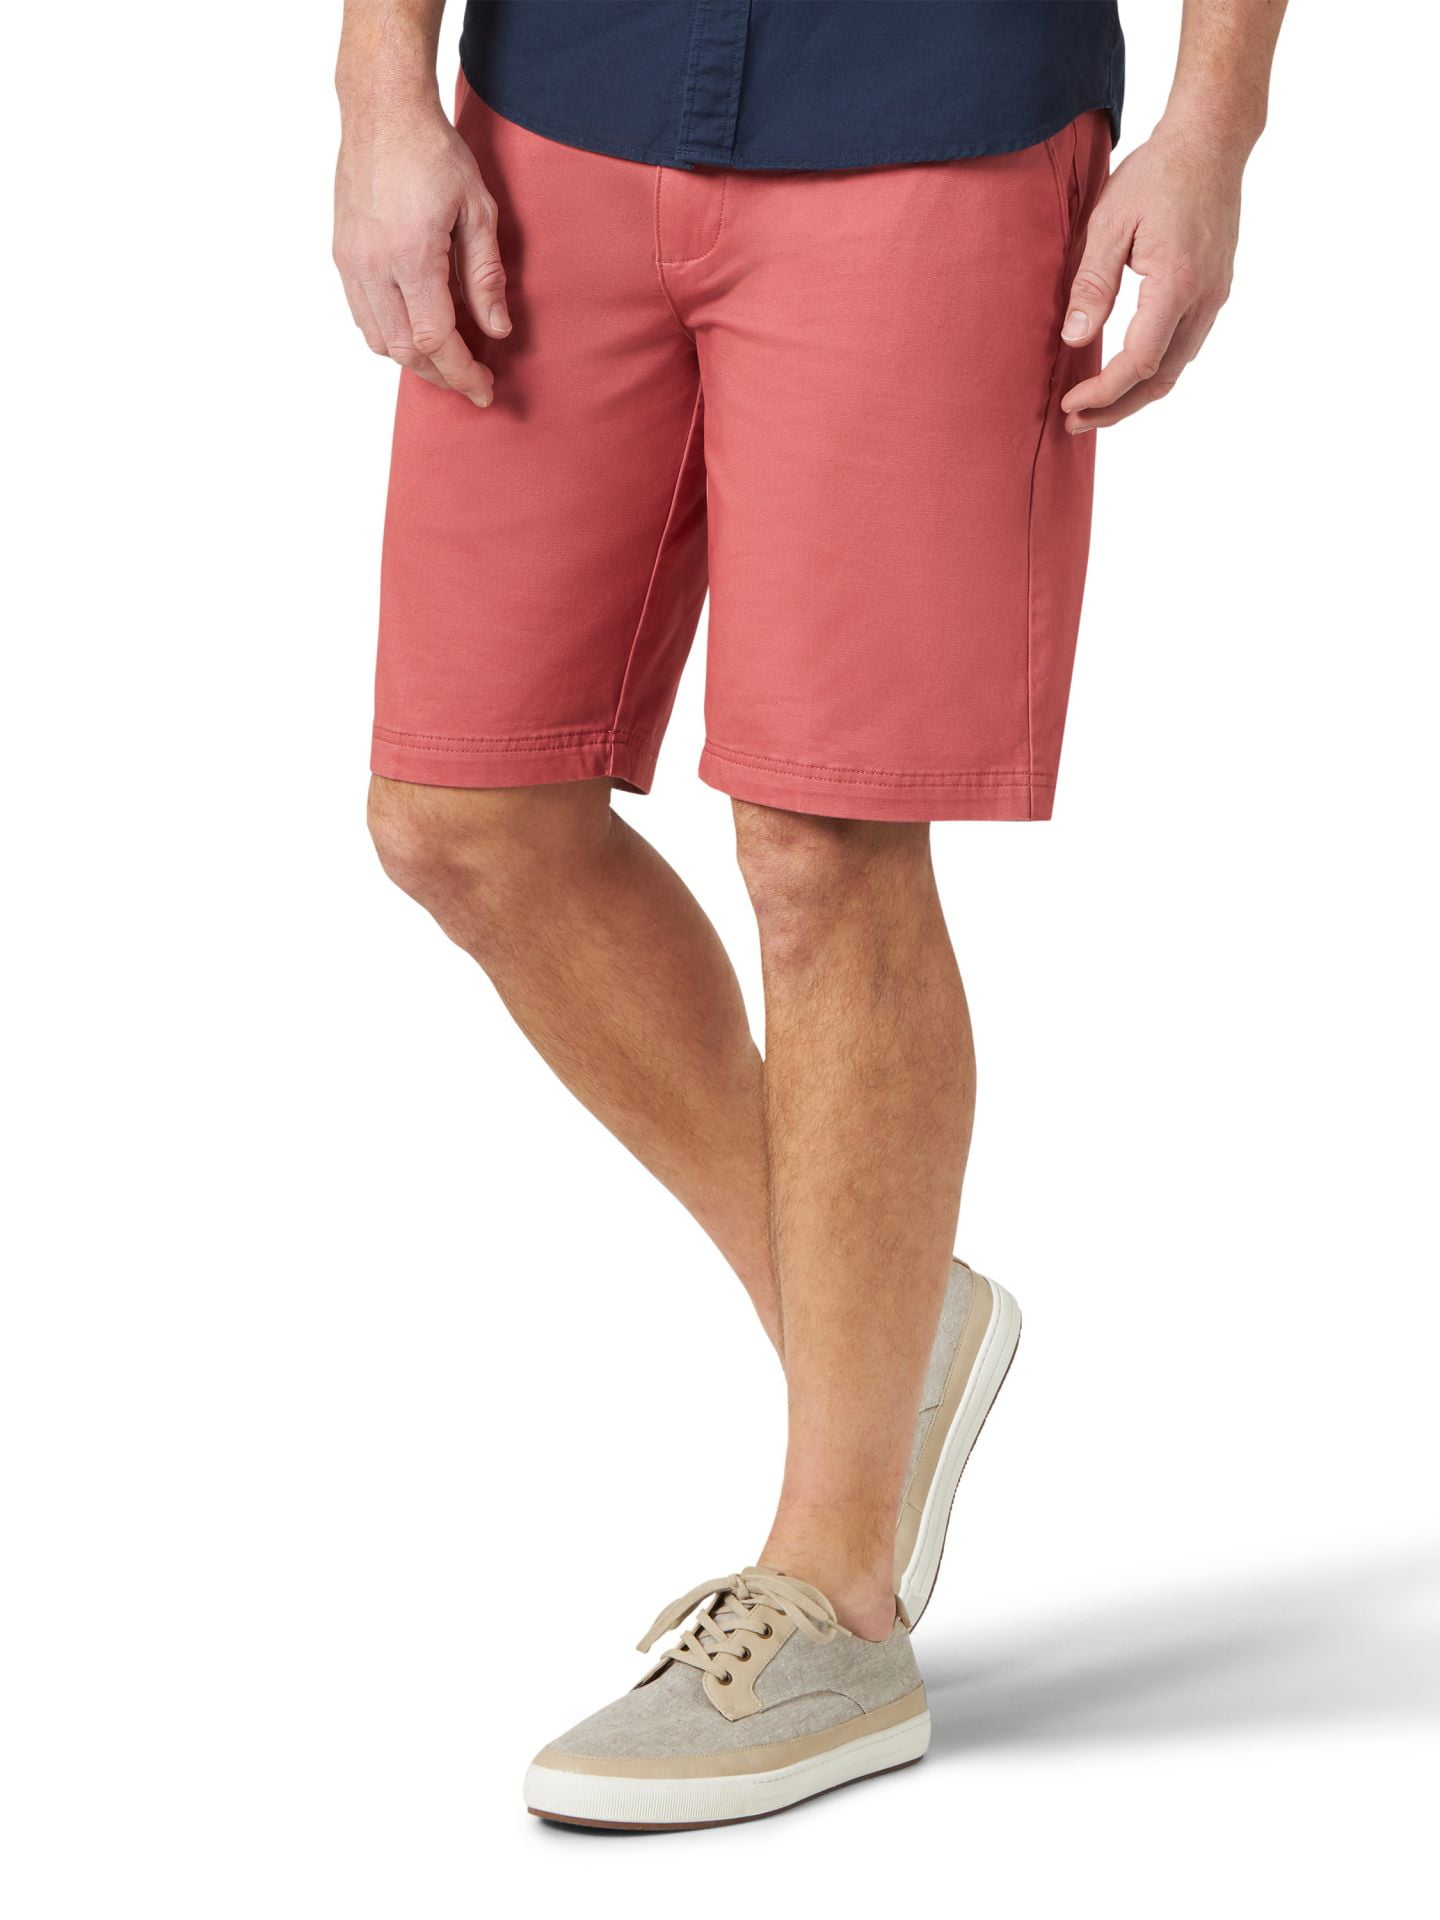 Lee Men's Extreme Comfort Shorts - Coral, Coral, 38 